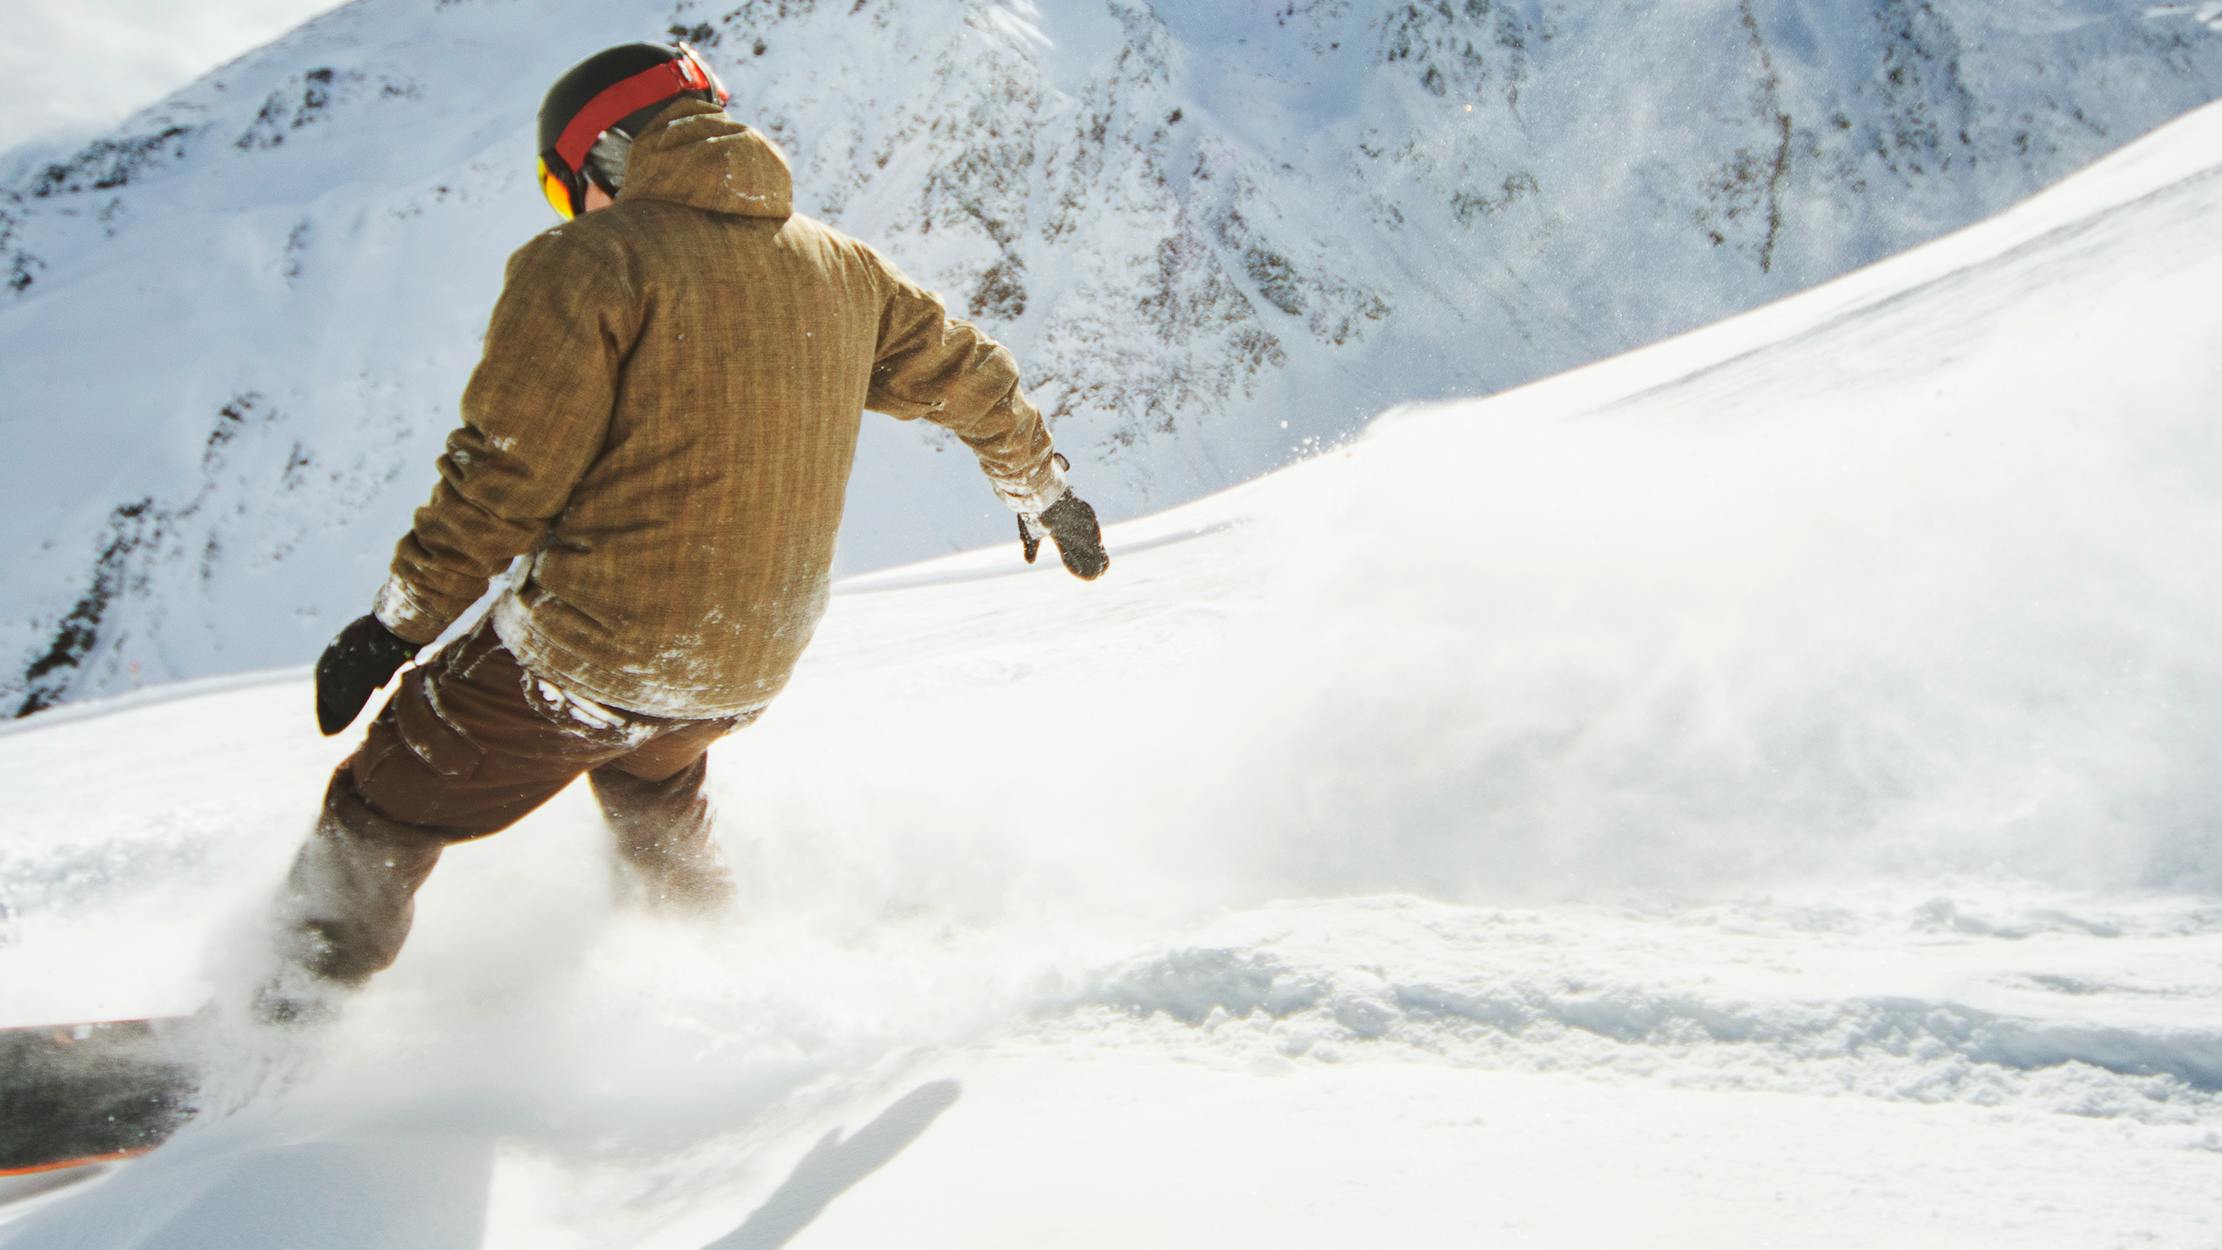 A snowboarder in a beige jacket makes their way down the mountain with a cloud of powder behind them